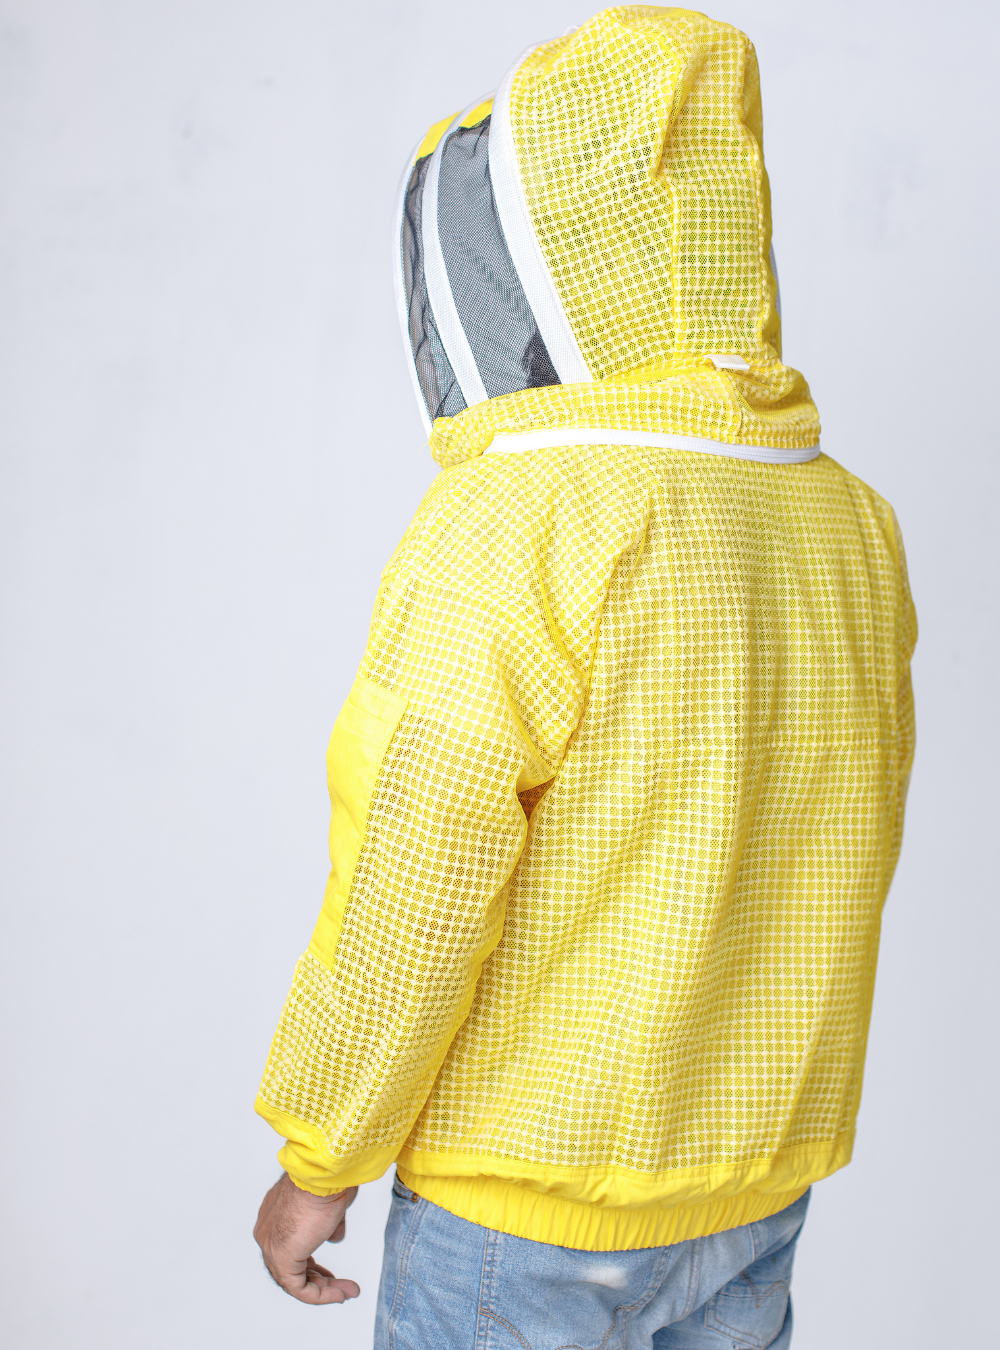  Yellow Beekeeping jacket incorporating a breathable hood and double-stitched construction for durability Back Look.